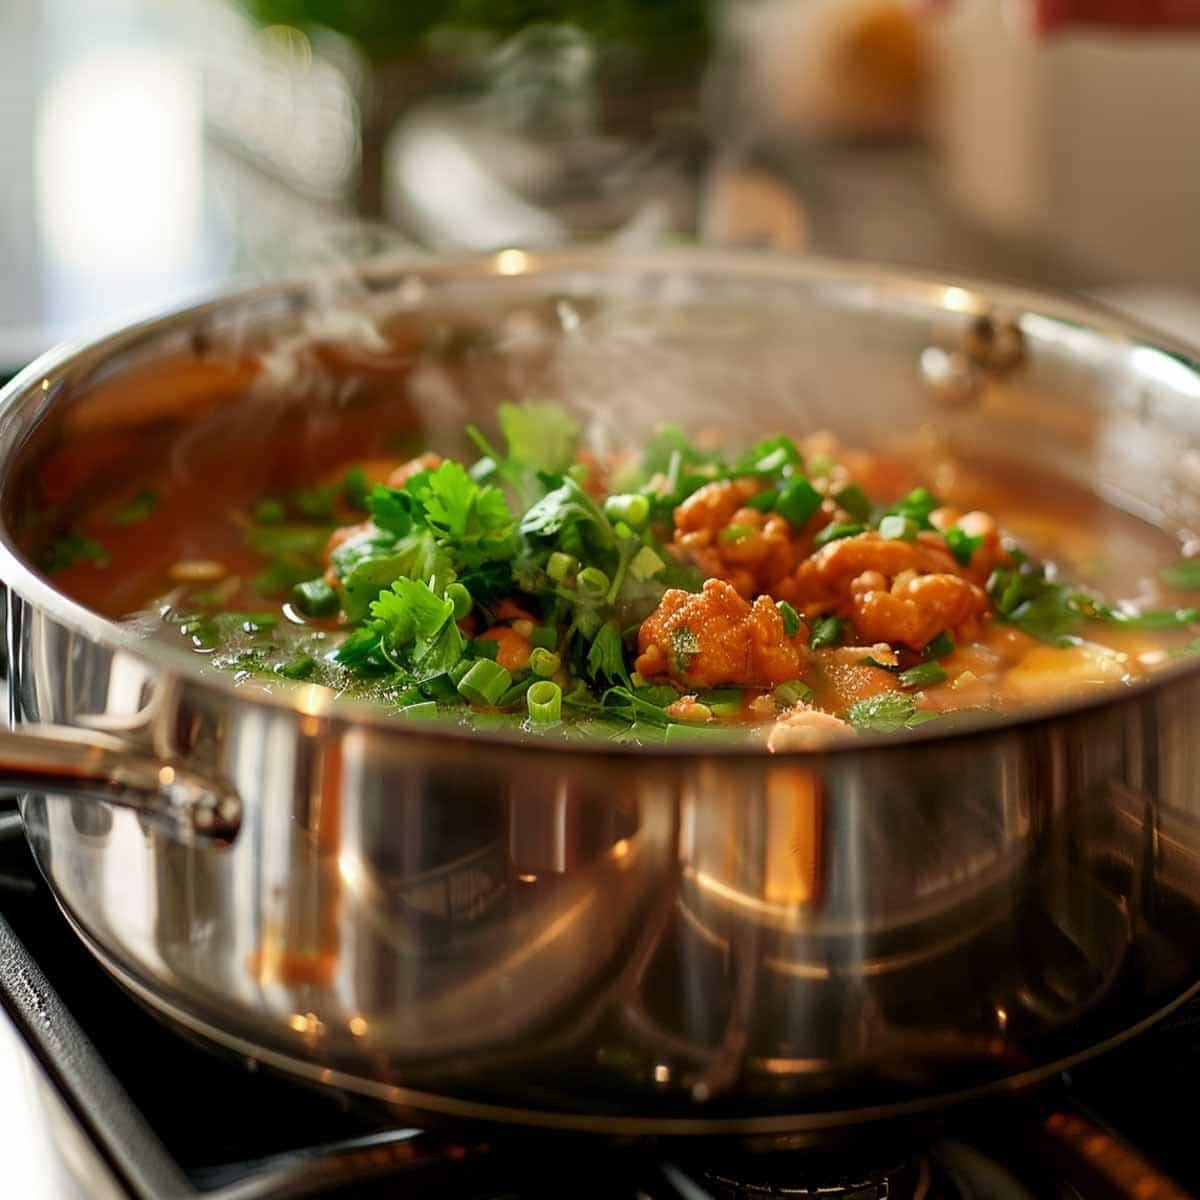 An image depicting a pot of Thai Rice Soup (Khao Tom) on a stove, with all the ingredients being combined. The pot is filled with jasmine rice, slices of chicken, ginger, and garlic, all simmering together in a clear broth. Scattered green onions and cilantro are being added, enhancing the colorful and vibrant mix. The steam rising from the pot conveys the warmth and inviting aroma of this traditional Thai dish.